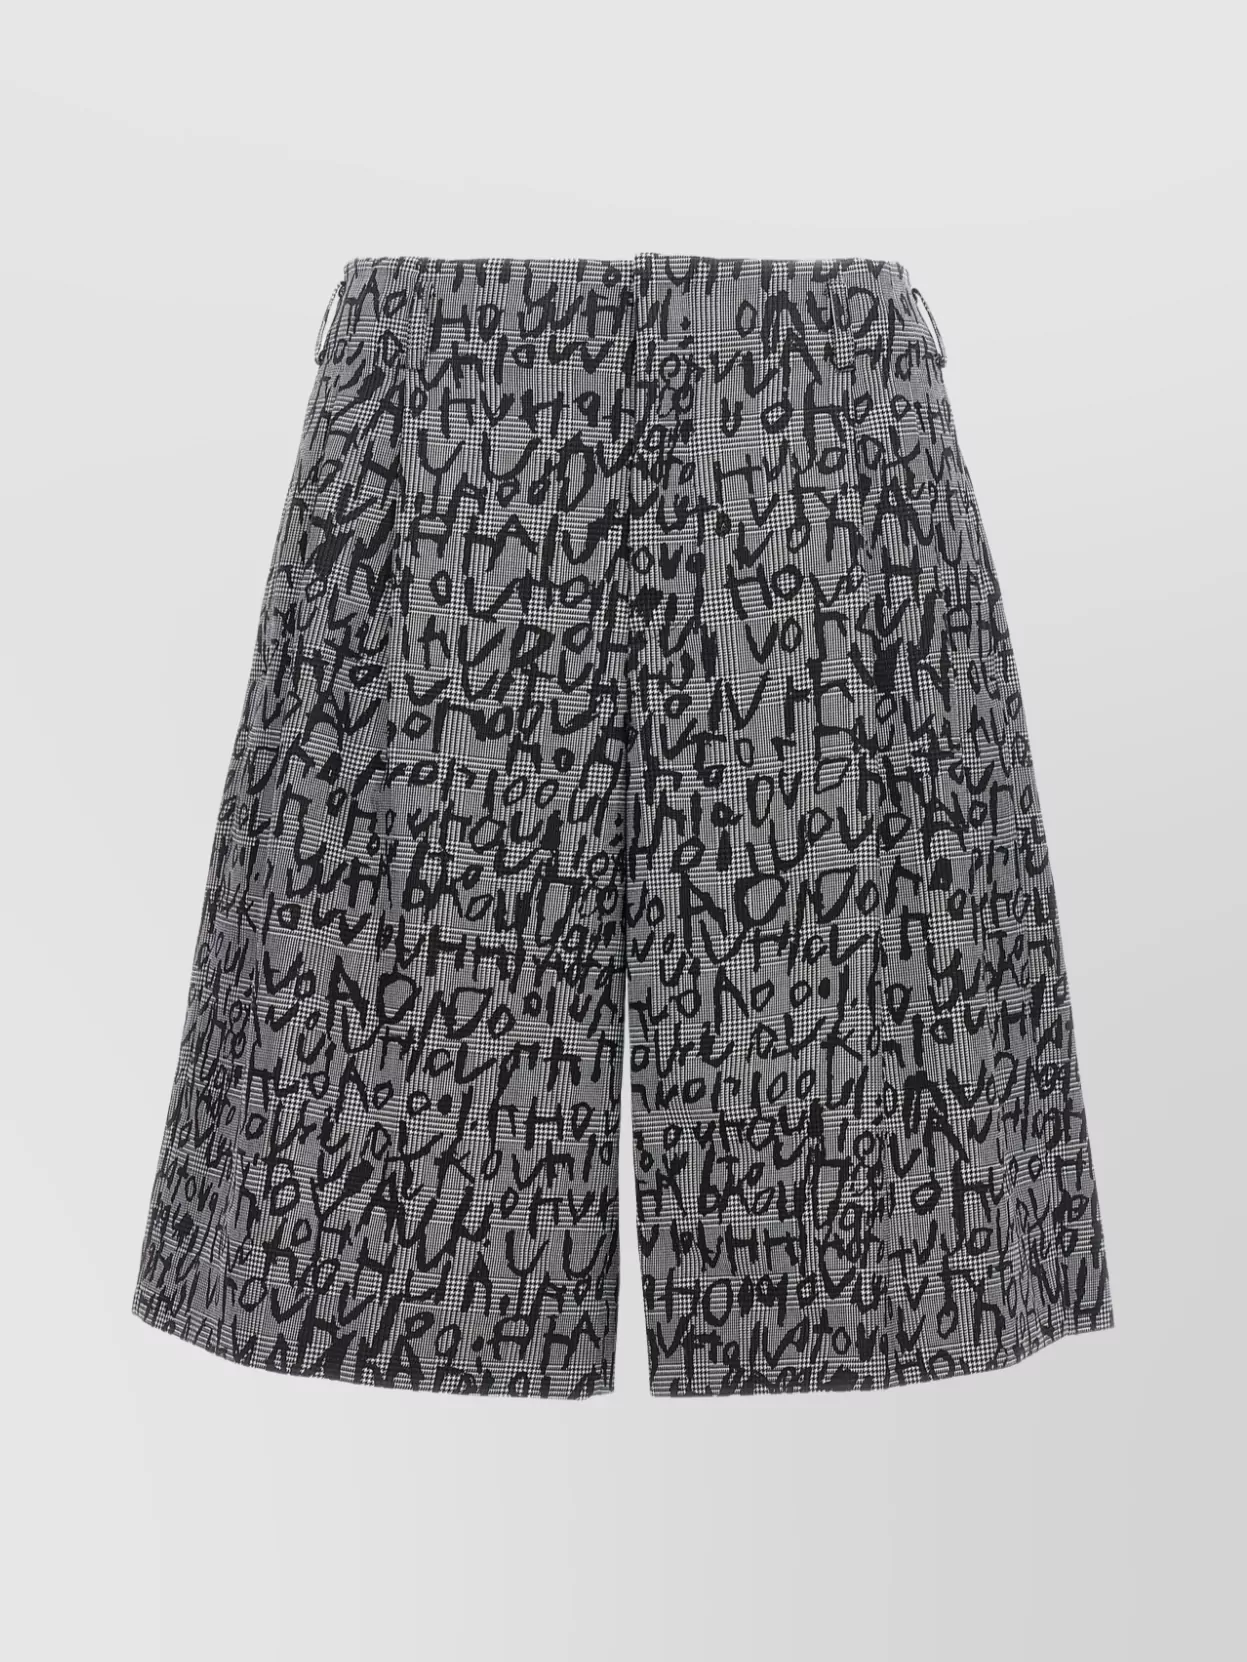 Shop Comme Des Garçons Bermuda Shorts Featuring All-over Print And Button Detail